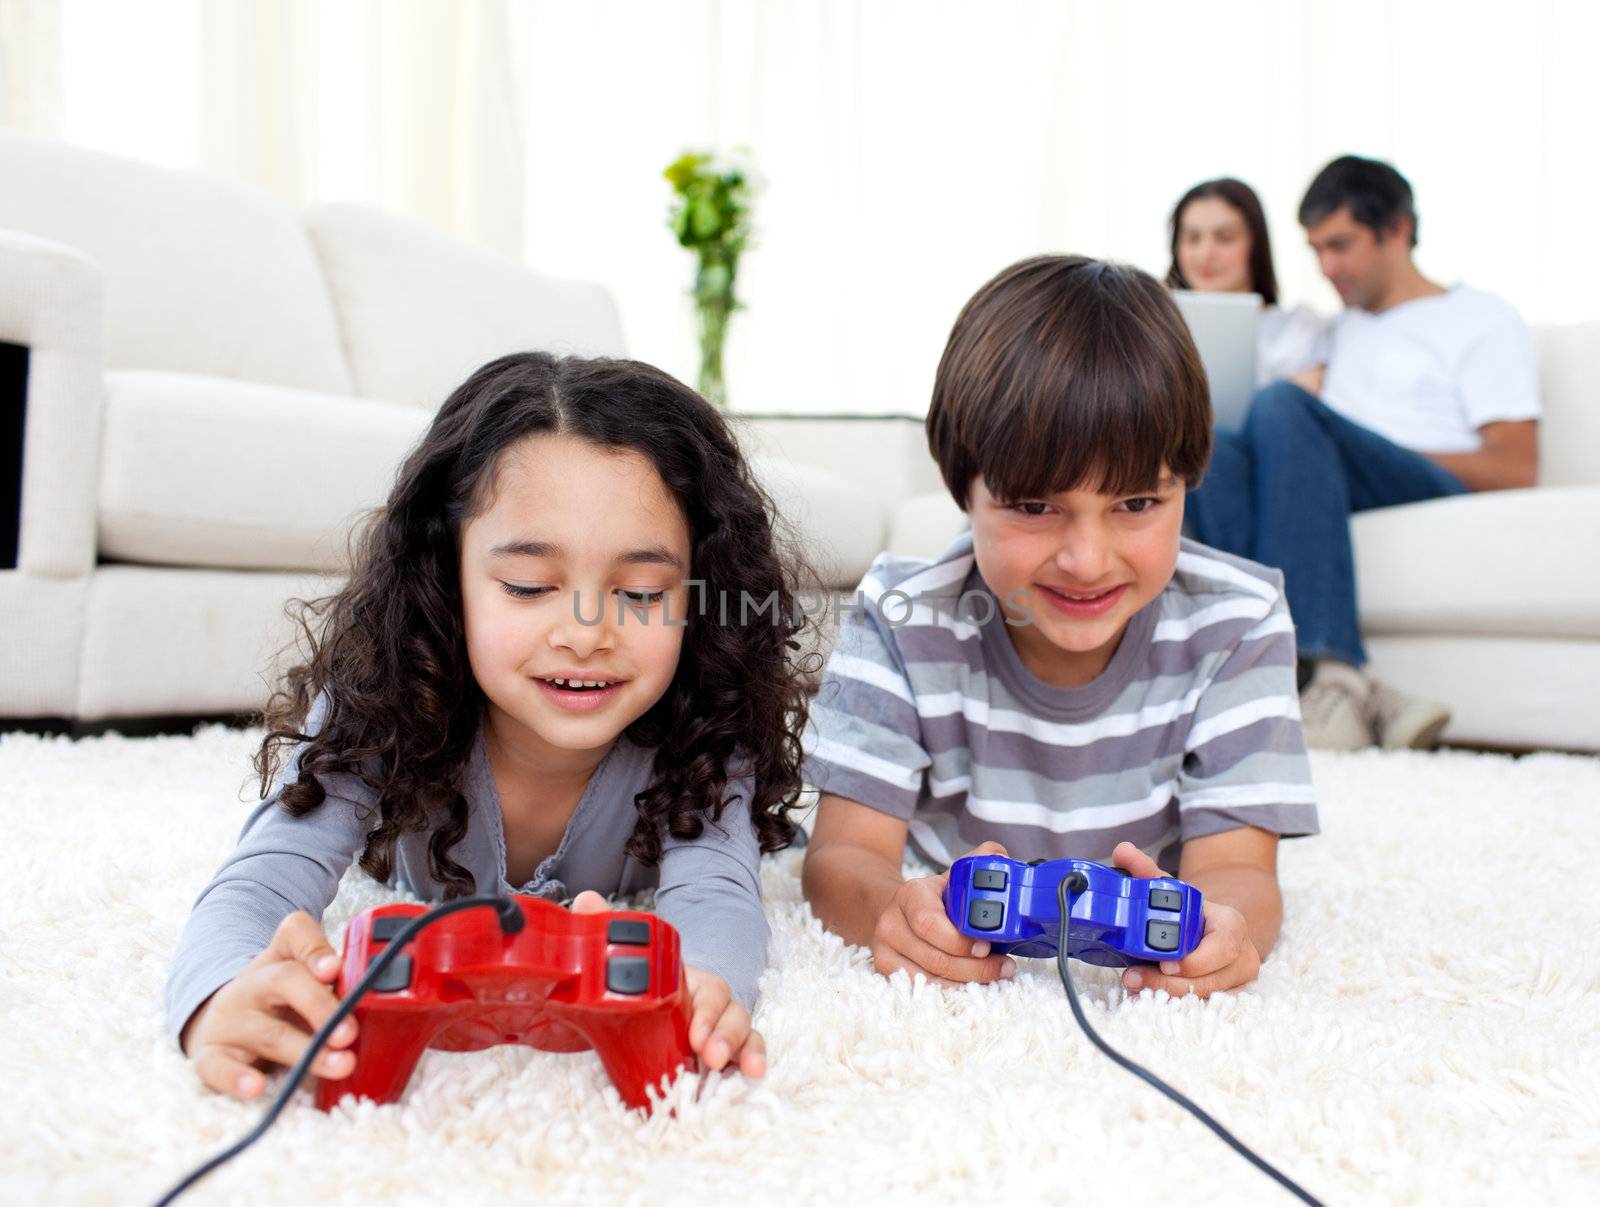 Jolly siblings playing video games lying on the floor with their parents in the background